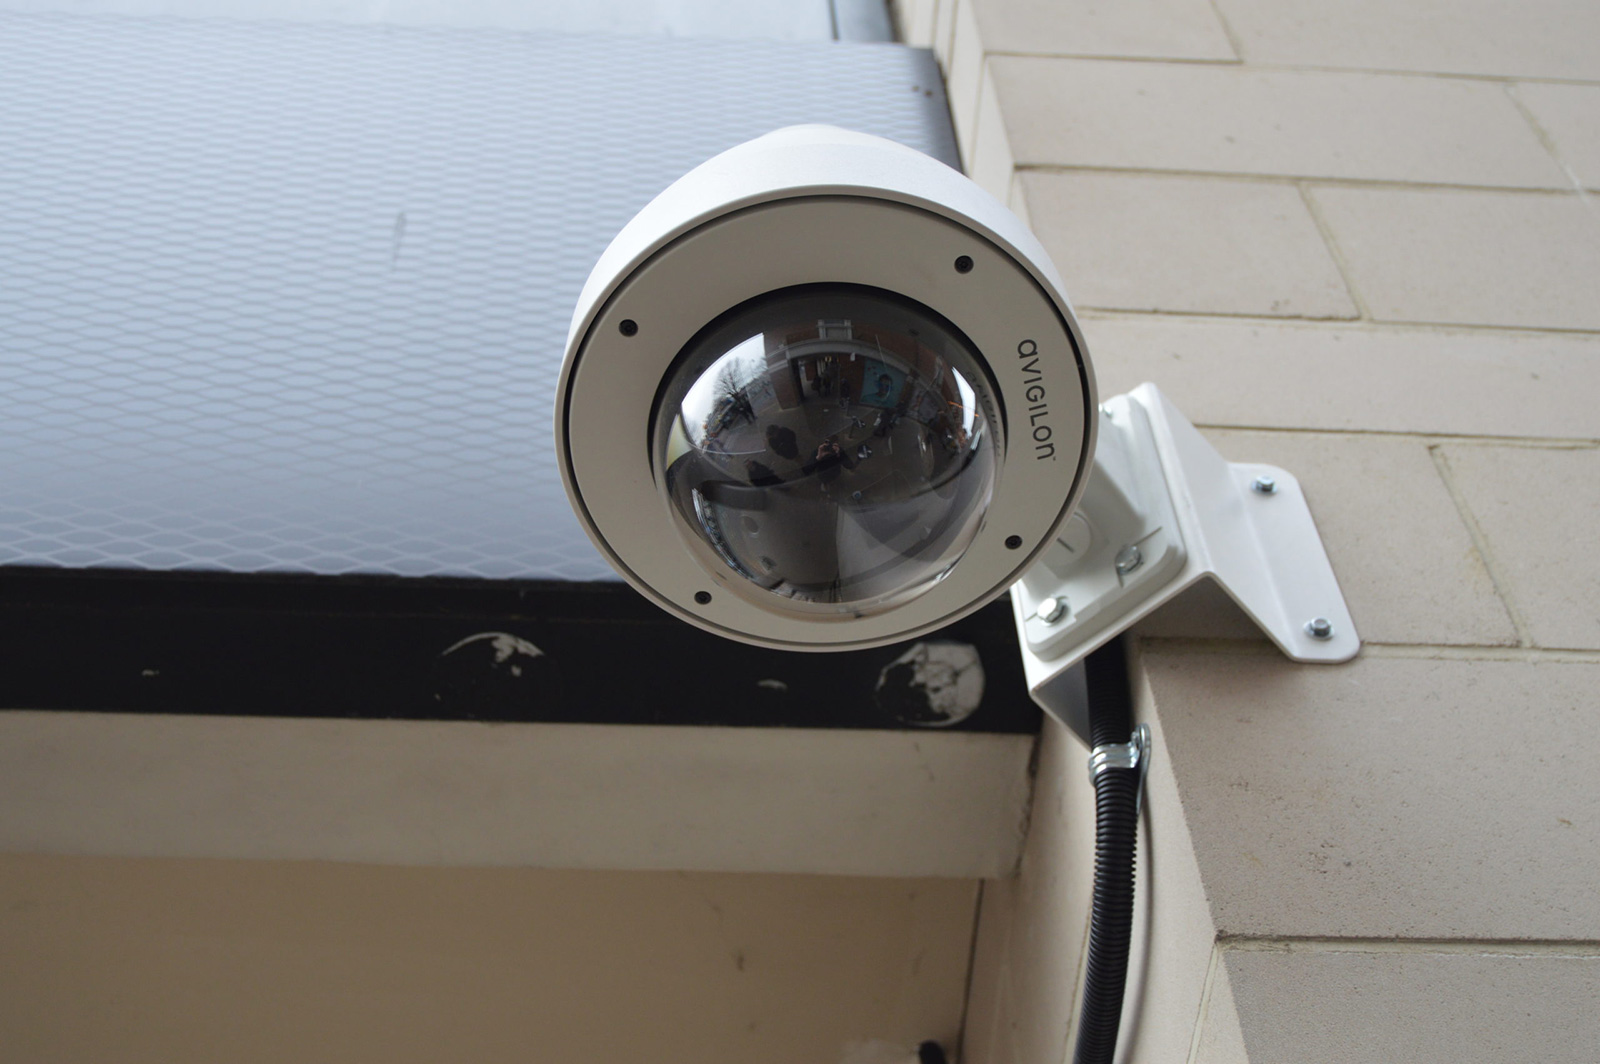 A CCTV camera installed by Link CCTV Systems for Whitefriars Shopping Centre.